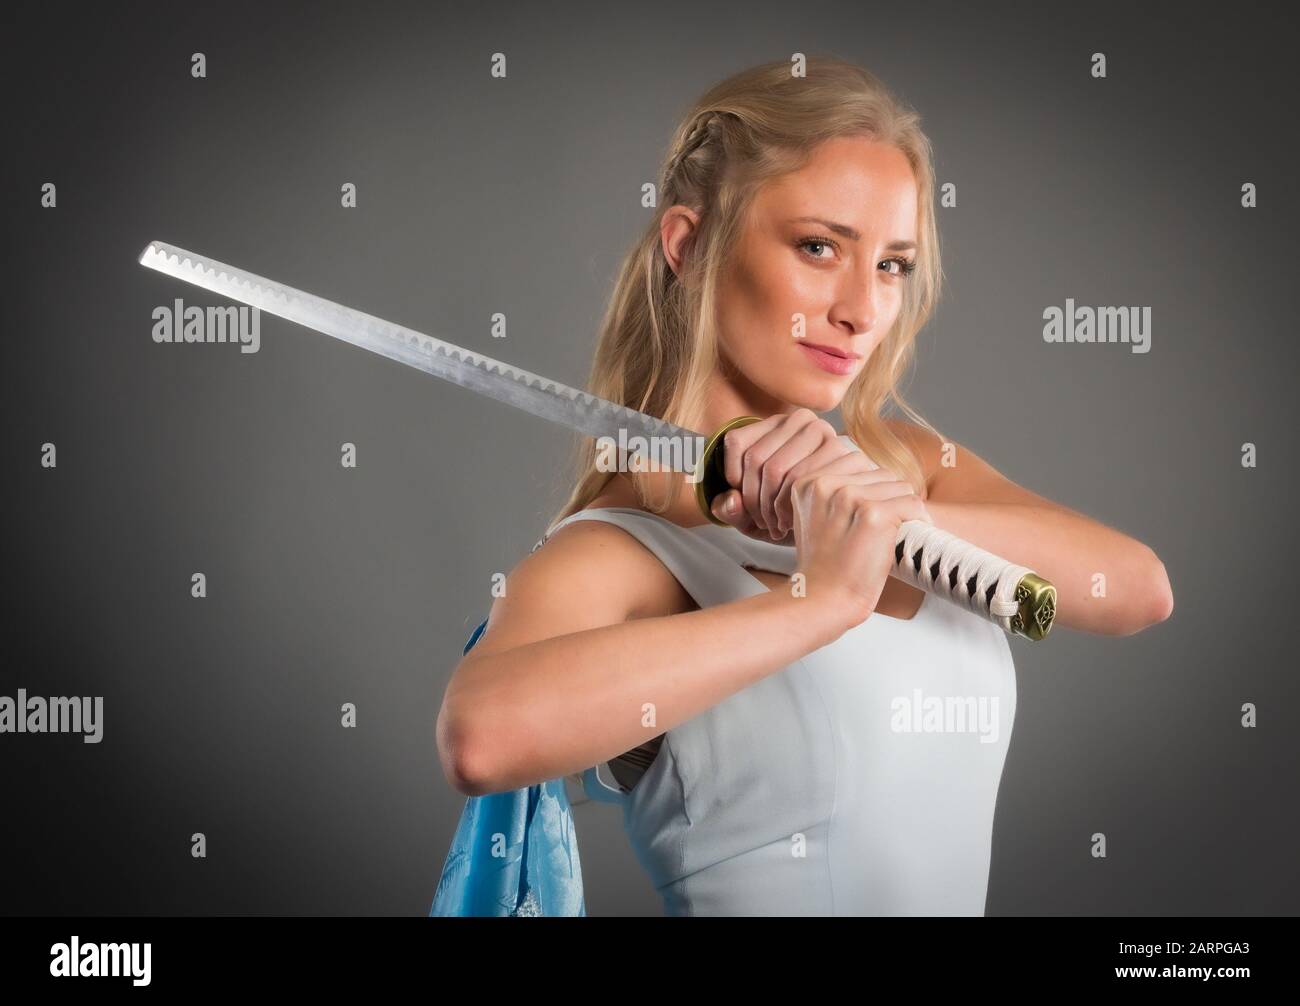 Cosplay style model in studio setting holding a sword Stock Photo